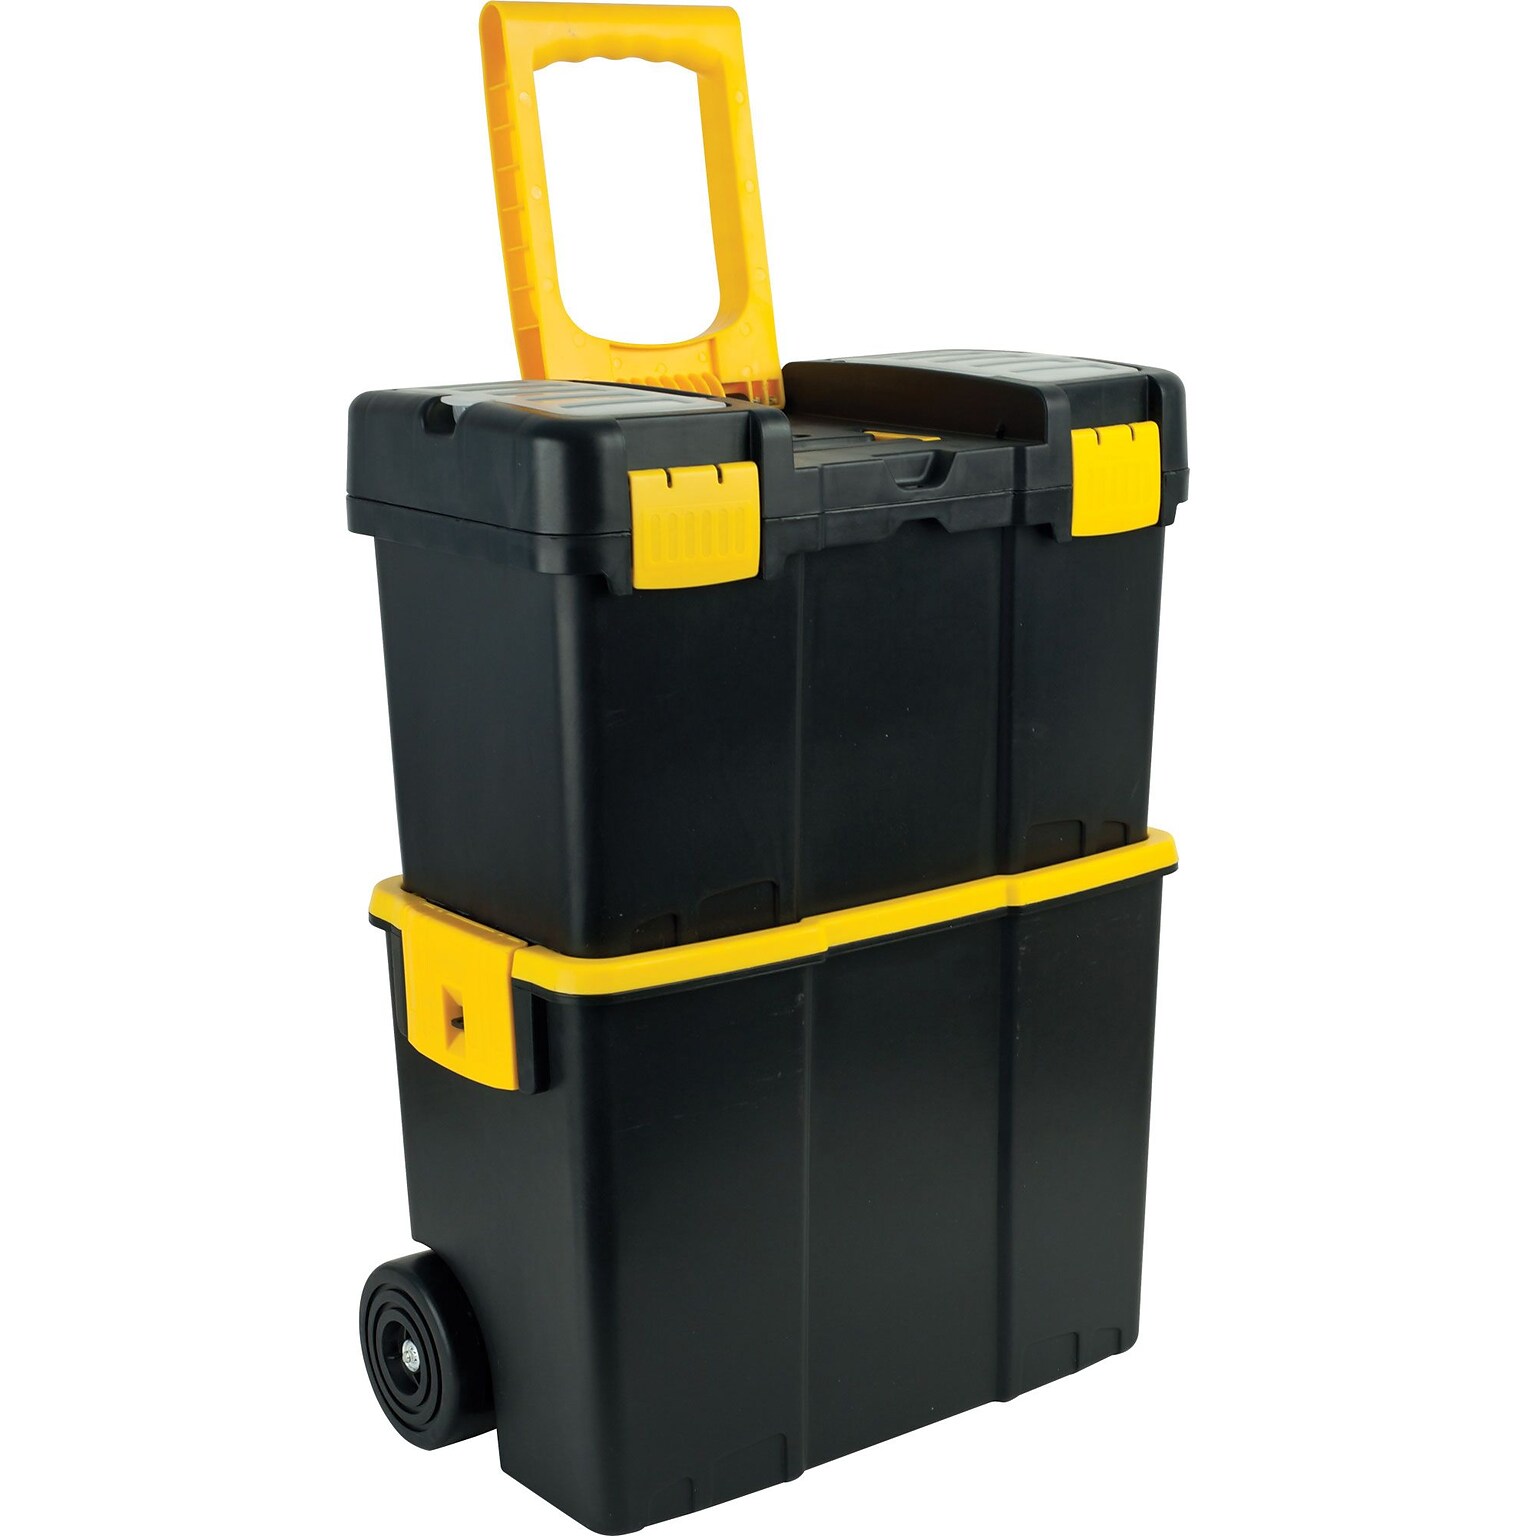 Trademark Tools™ Stackable Mobile Tool Box with Wheel, 10 L x 17 7/8 W x 24 1/8 H